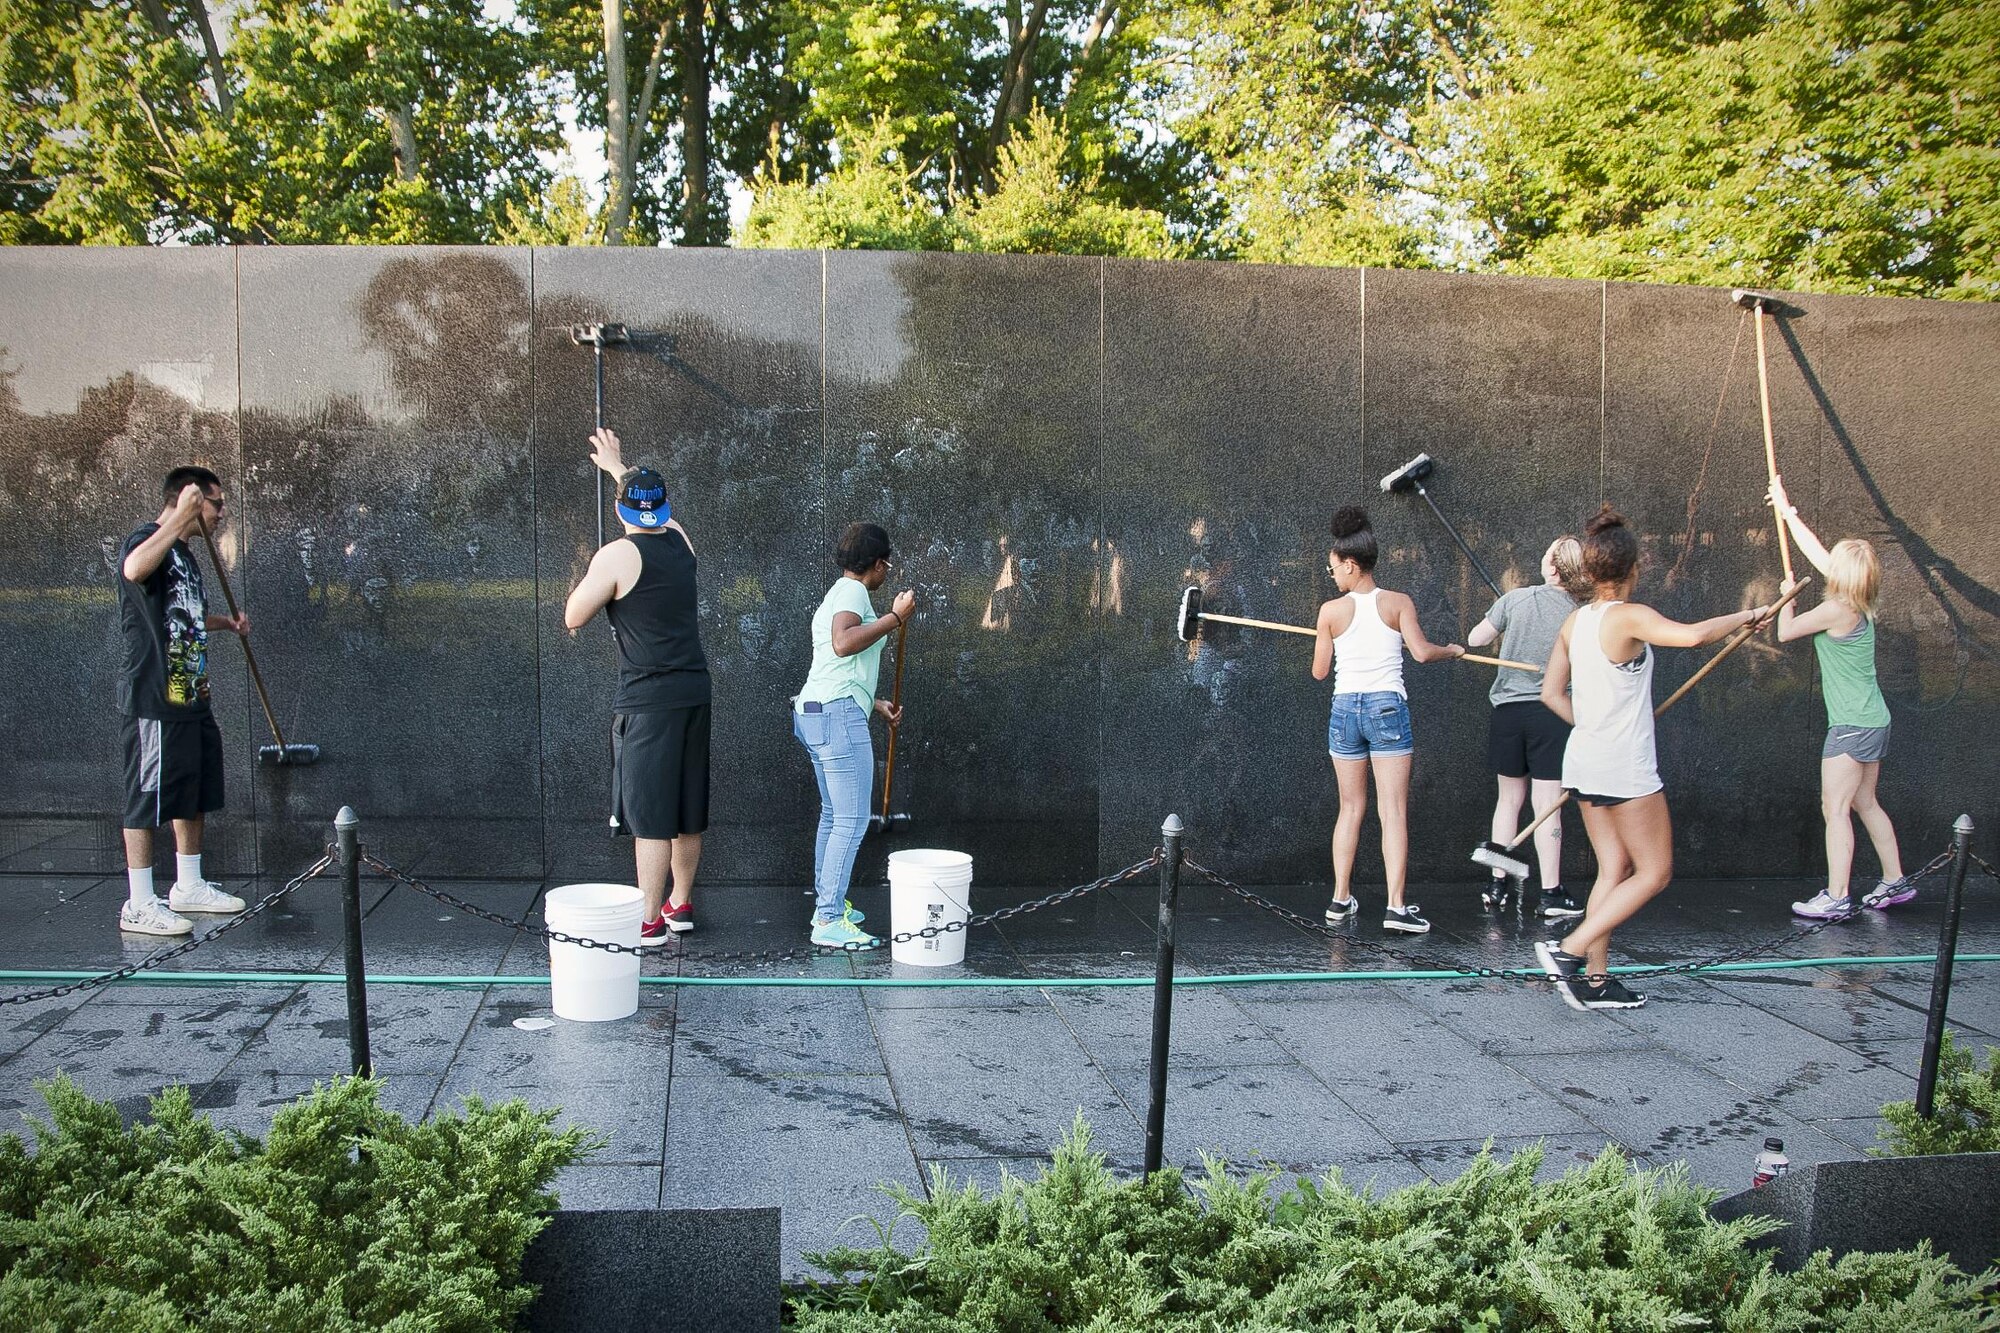 Members of the 459th Air Refueling Wing wash the Korean War Veterans Memorial wall in Washington D.C., July 17, 2016. Volunteers from the 459th ARW came out in the early morning hours to clean the memorial prior to the arrival of daily visitors. (U.S. Air Force photo/Staff Sgt. Kat Justen)
